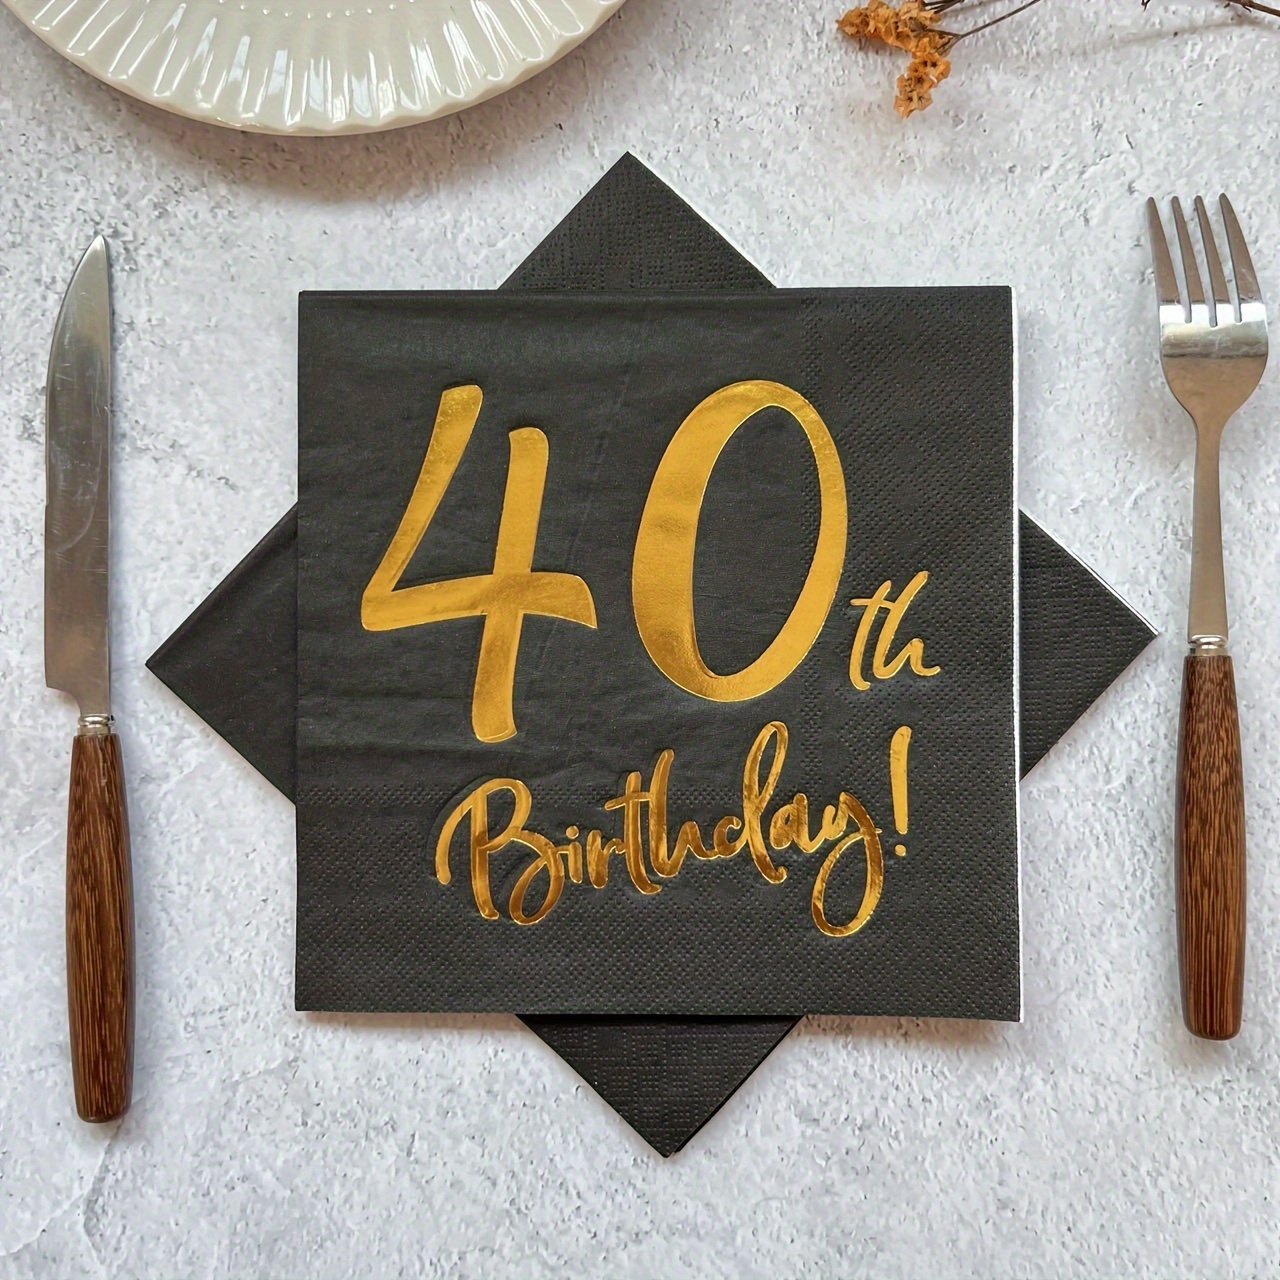 

40th Birthday Black Gold Foil Napkins - 20 Pack, 2-ply Disposable Paper Napkins For 40th Birthday Party, Hotel, Restaurant, Bar Tableware Supplies (6.5x6.5 Inch) - Carnival Themed Celebration